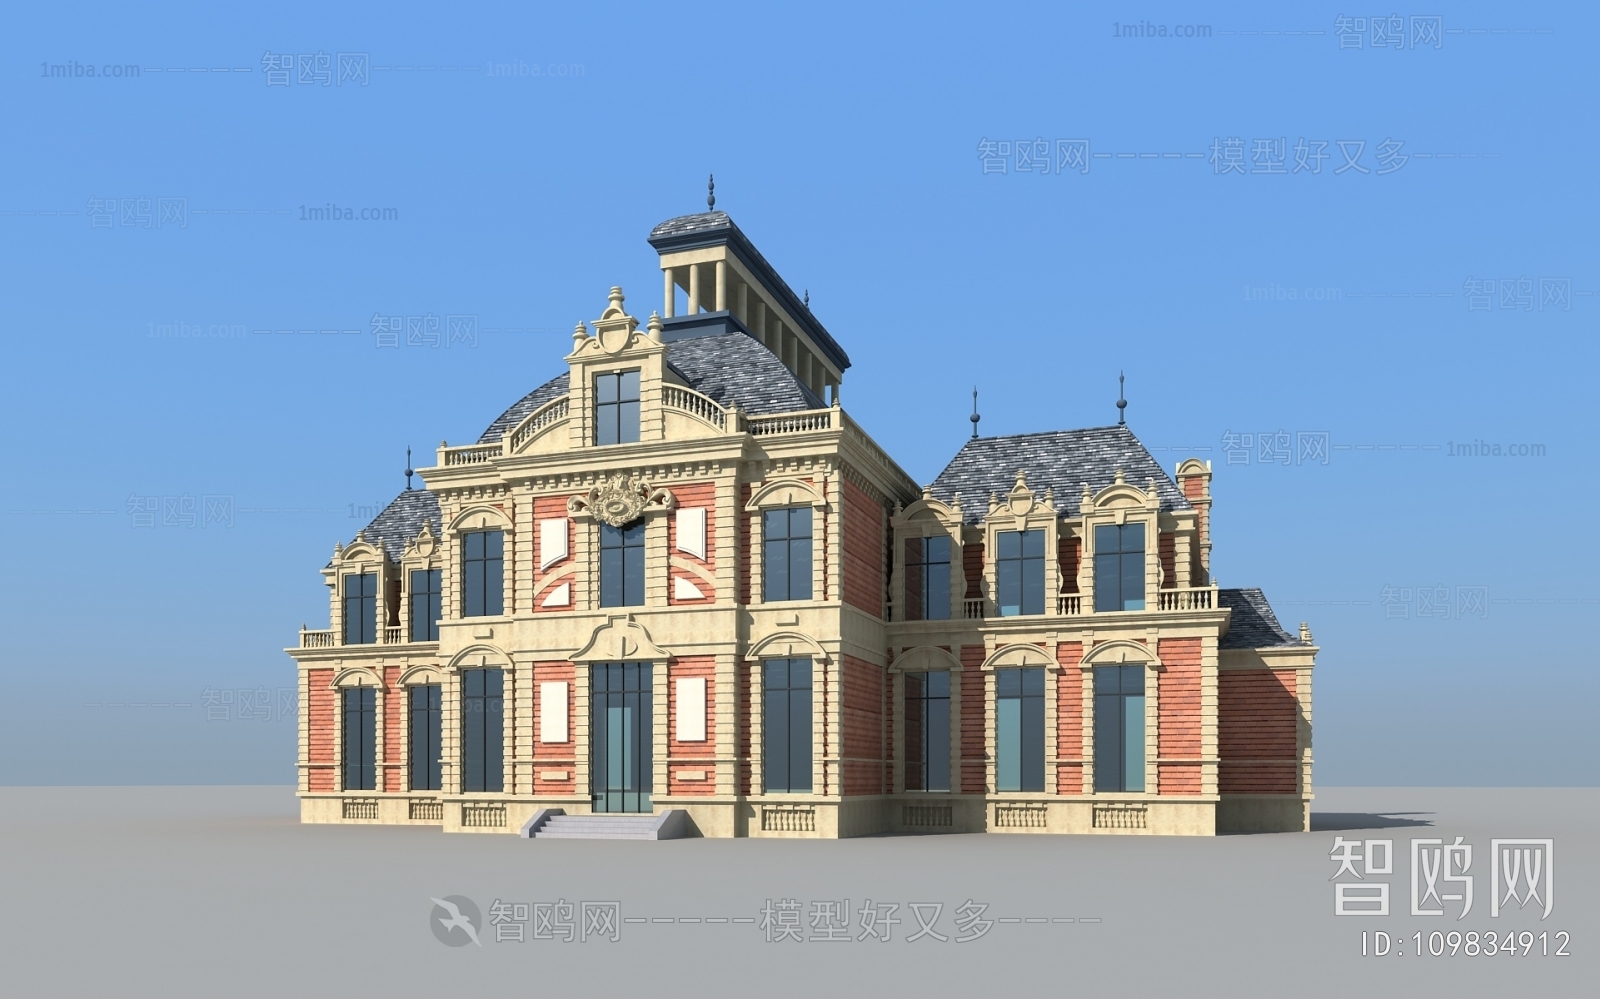 Simple European Style Building Appearance